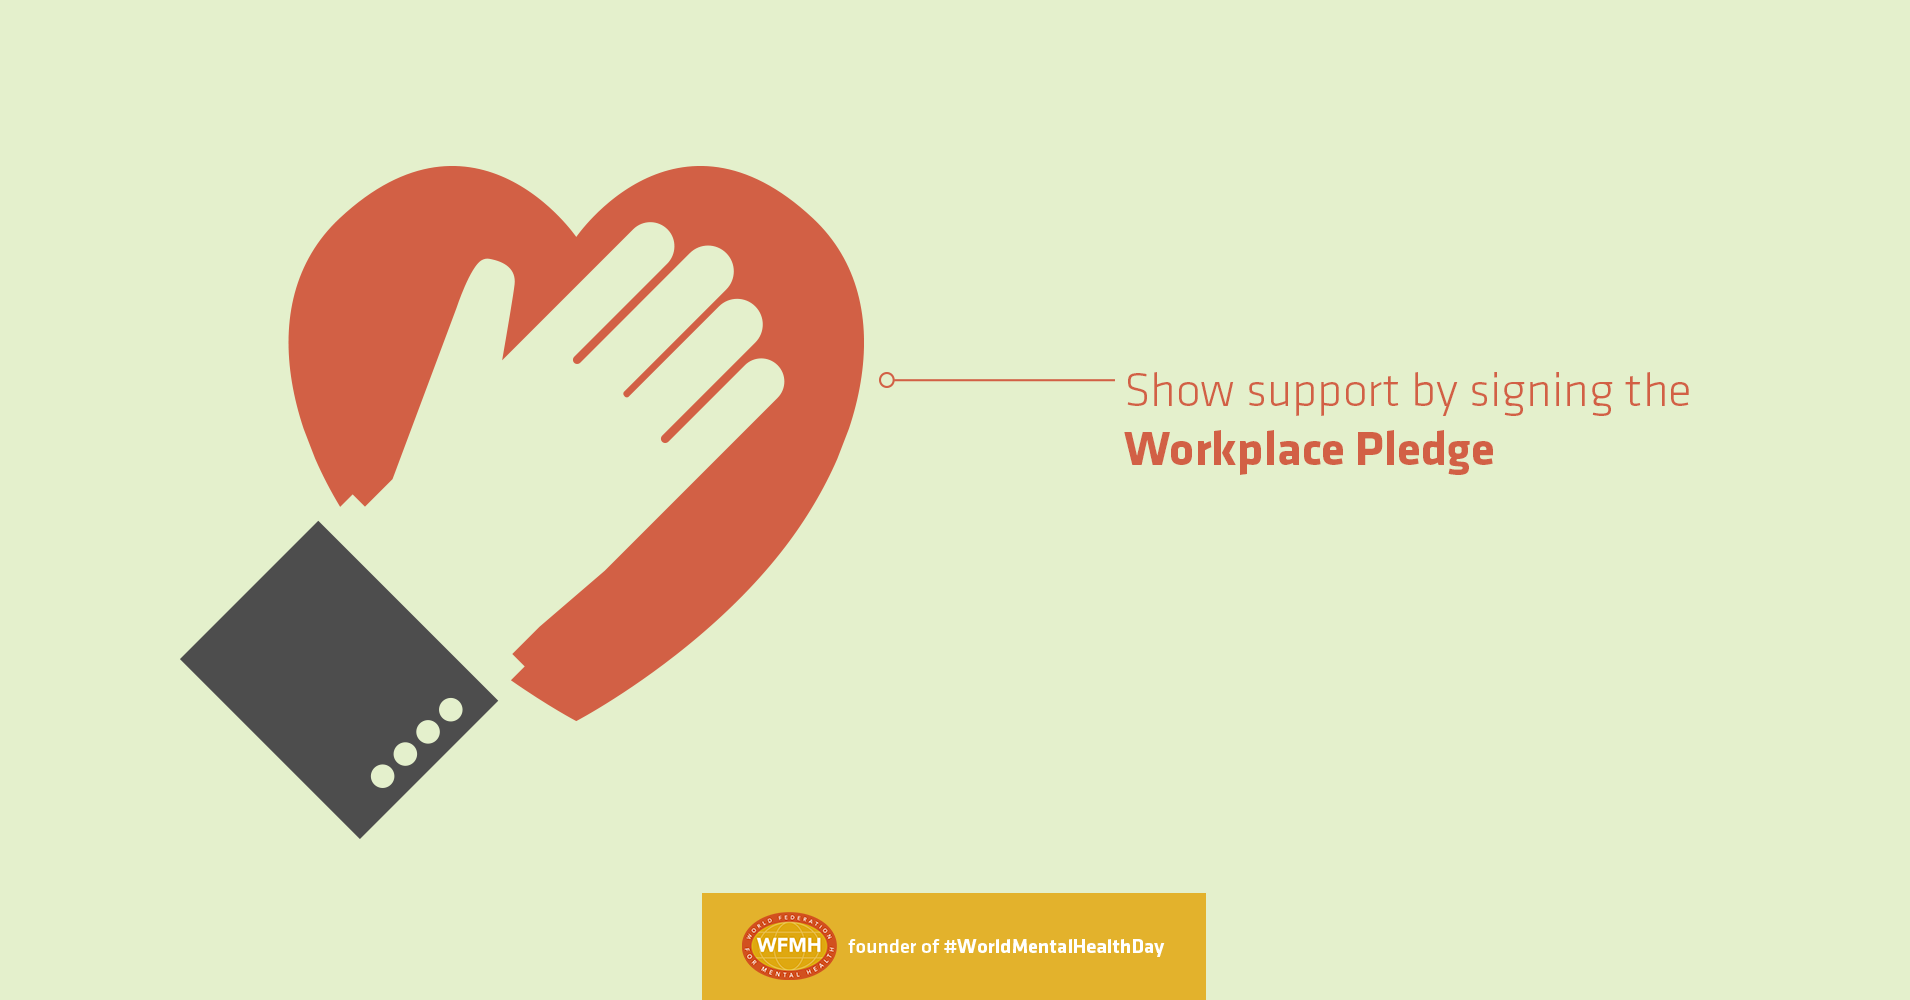 Download U0027Workplace Pledgeu0027 Image To Share On Your Social Media Profiles - Pledge, Transparent background PNG HD thumbnail